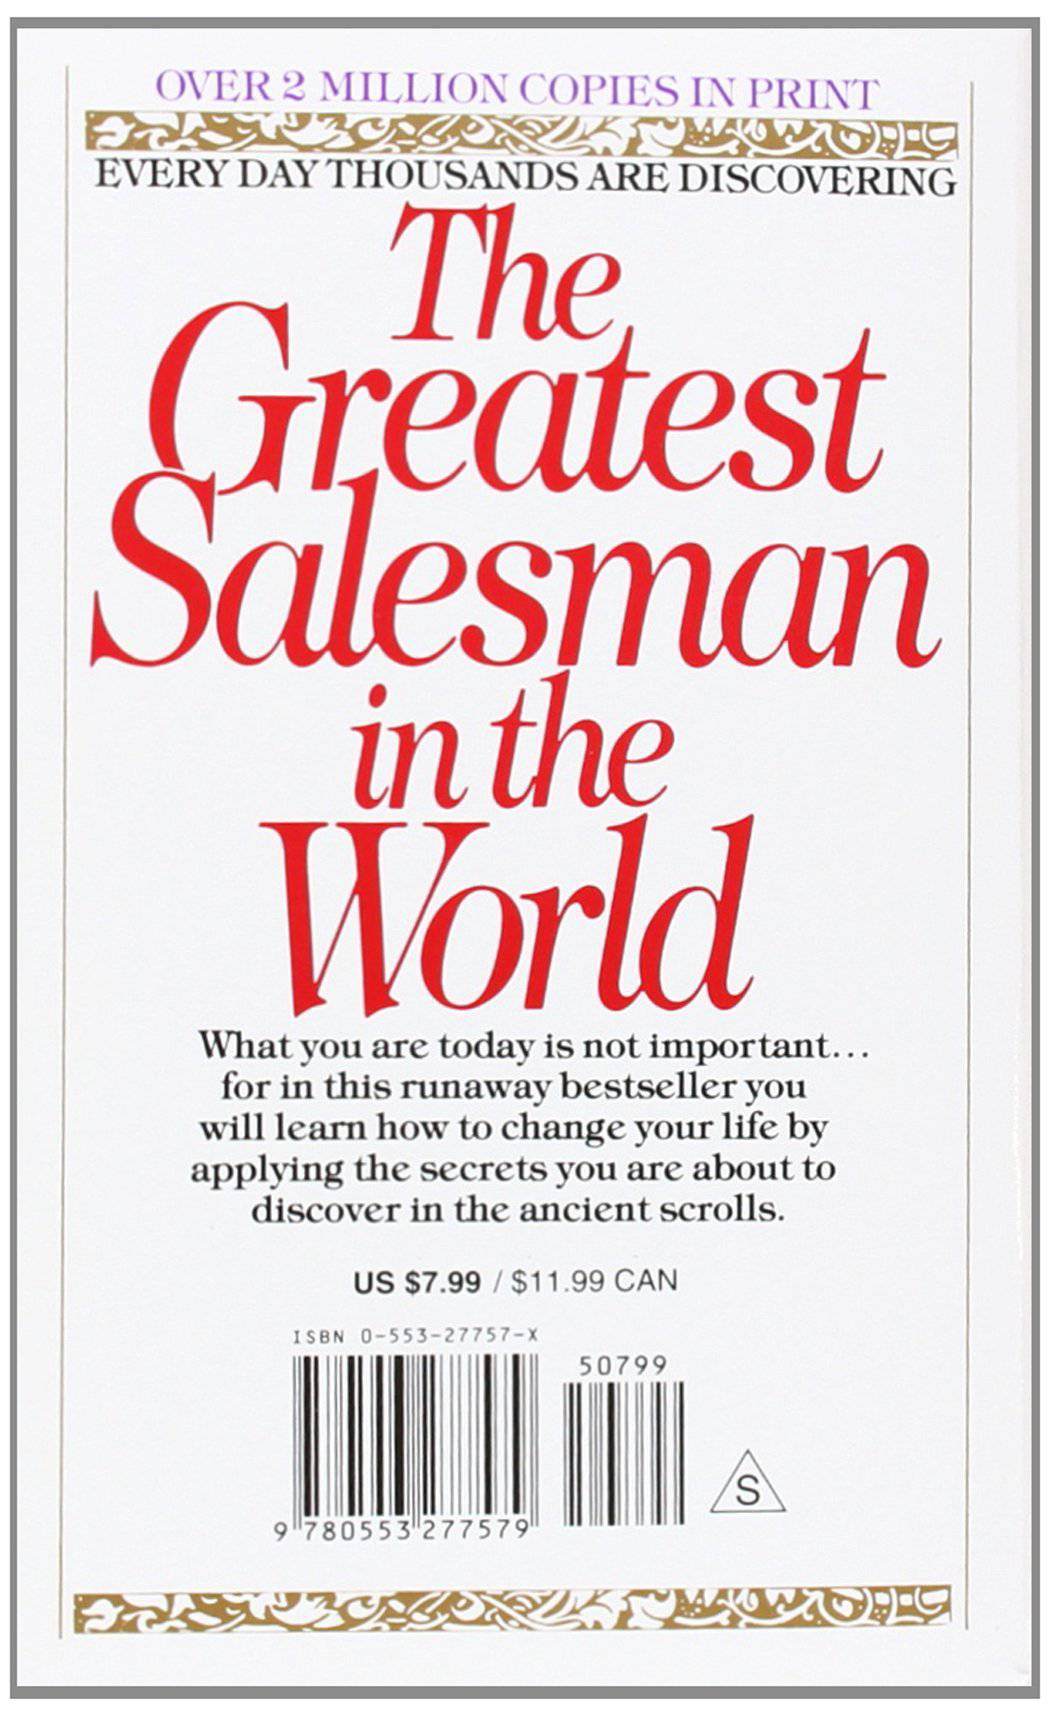 The Greatest Salesman in the World - Topaz Sales Consulting